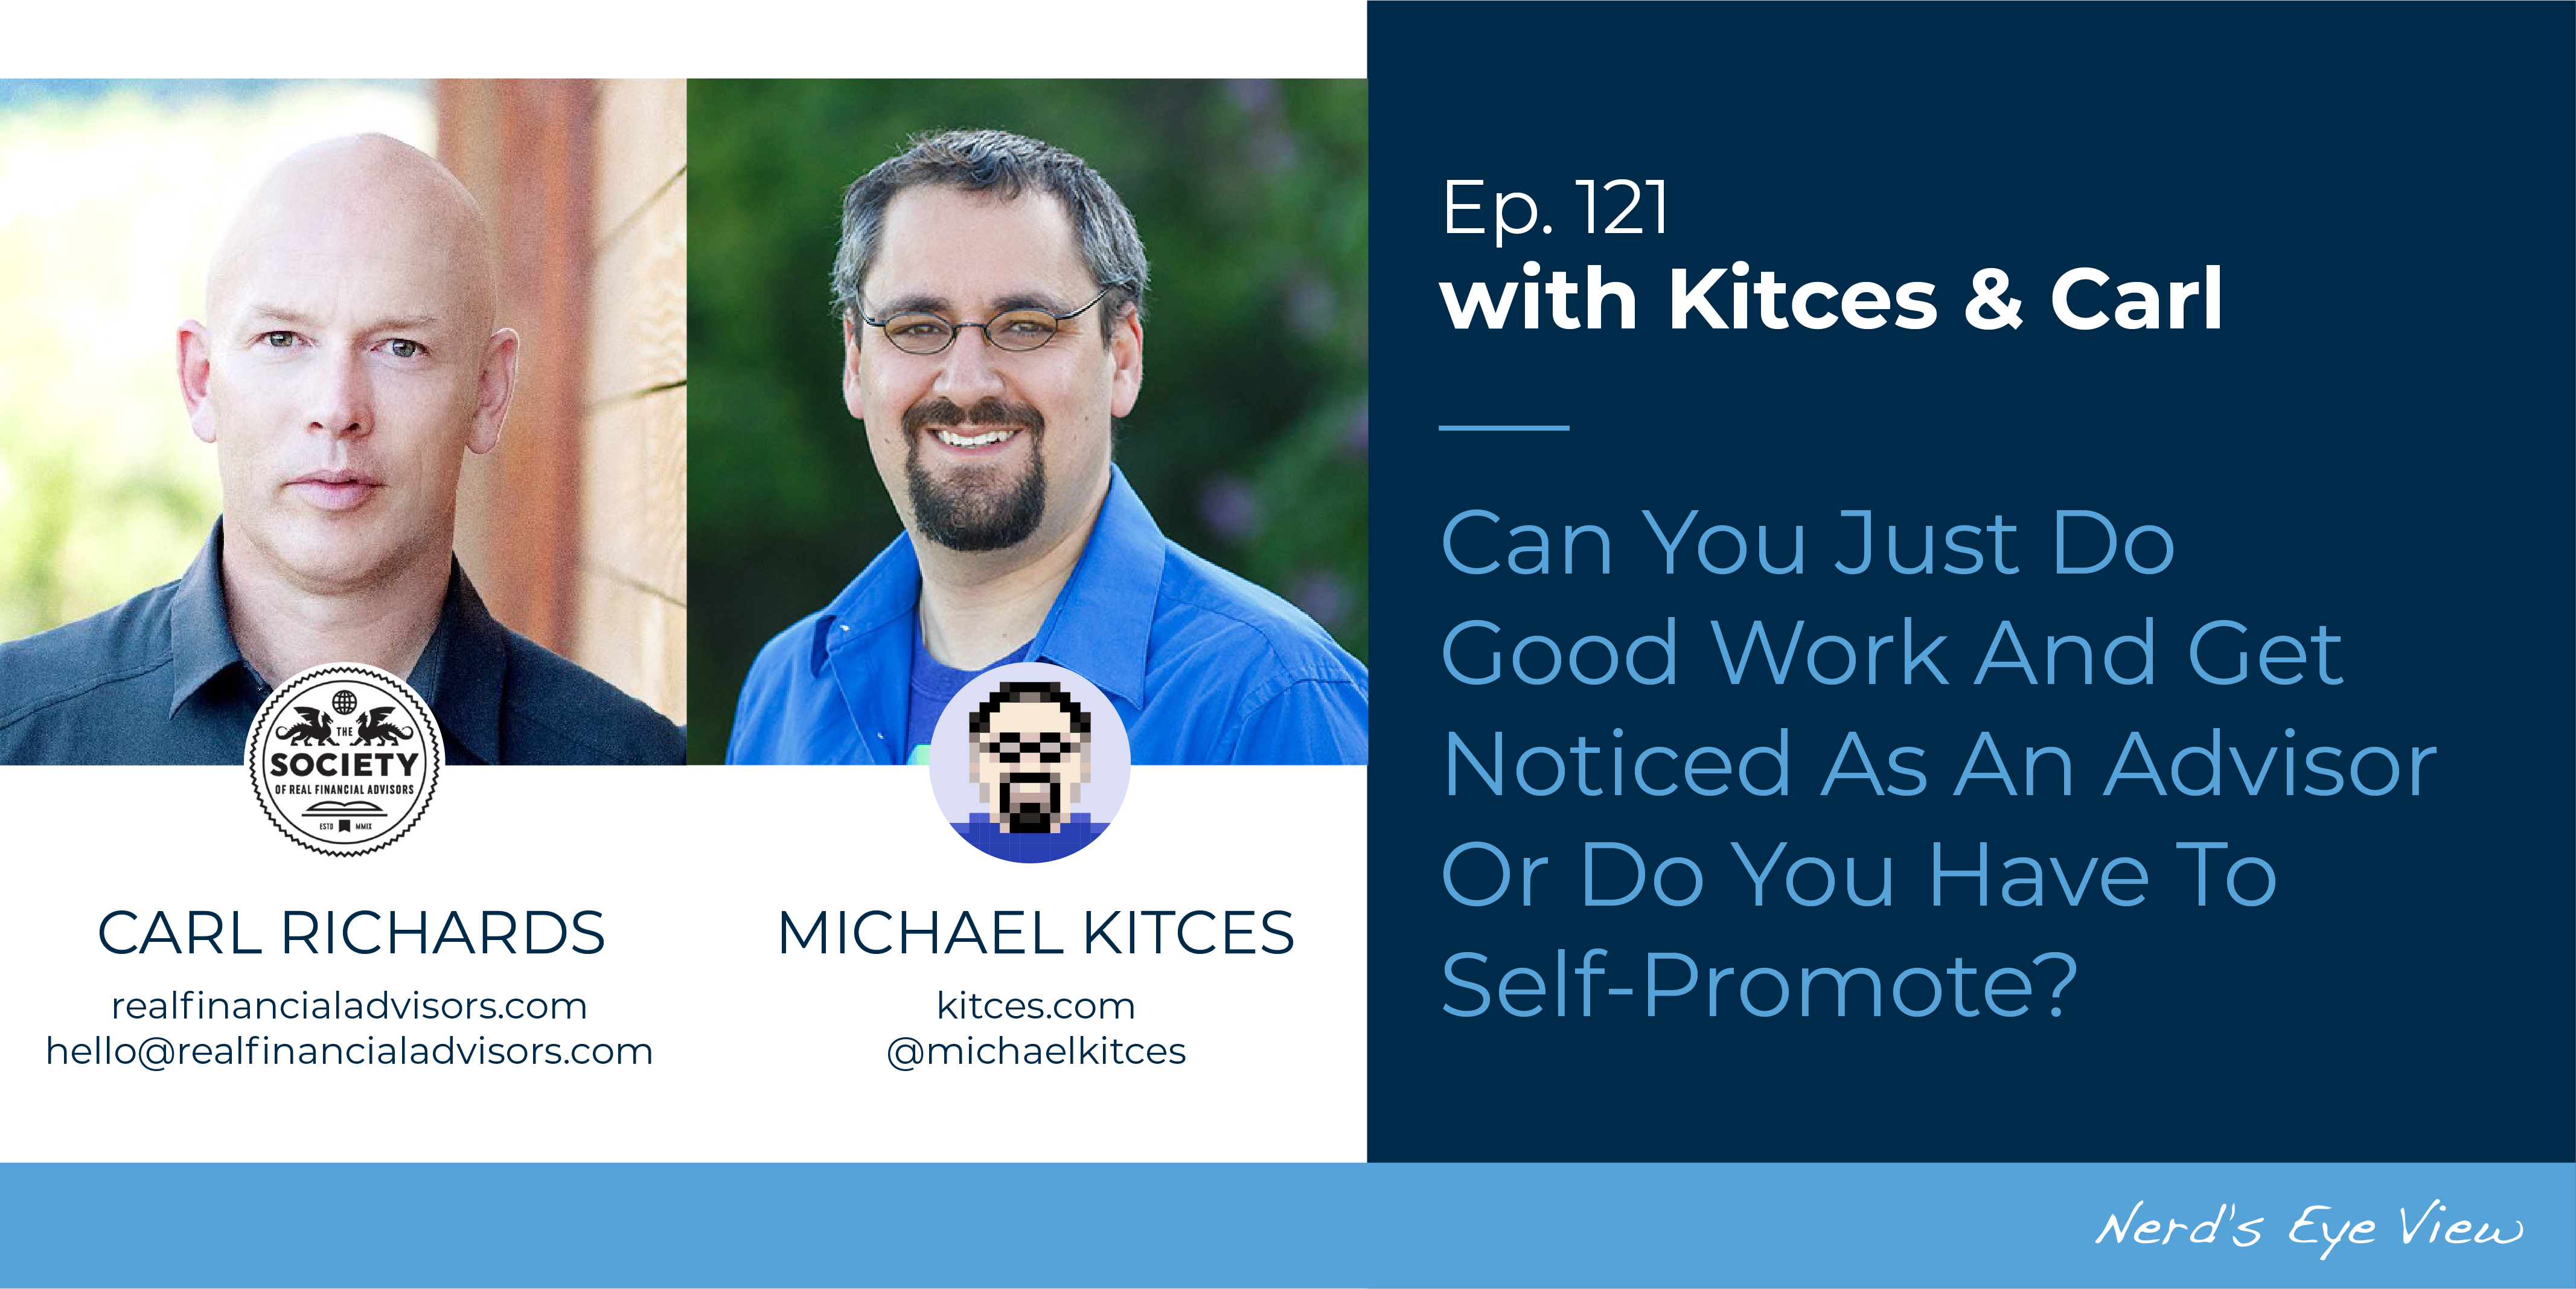 Kitces & Carl Ep 121: Can You Simply Do Good Work And Get Seen As An Advisor Or Do You Have To Self-Promote?